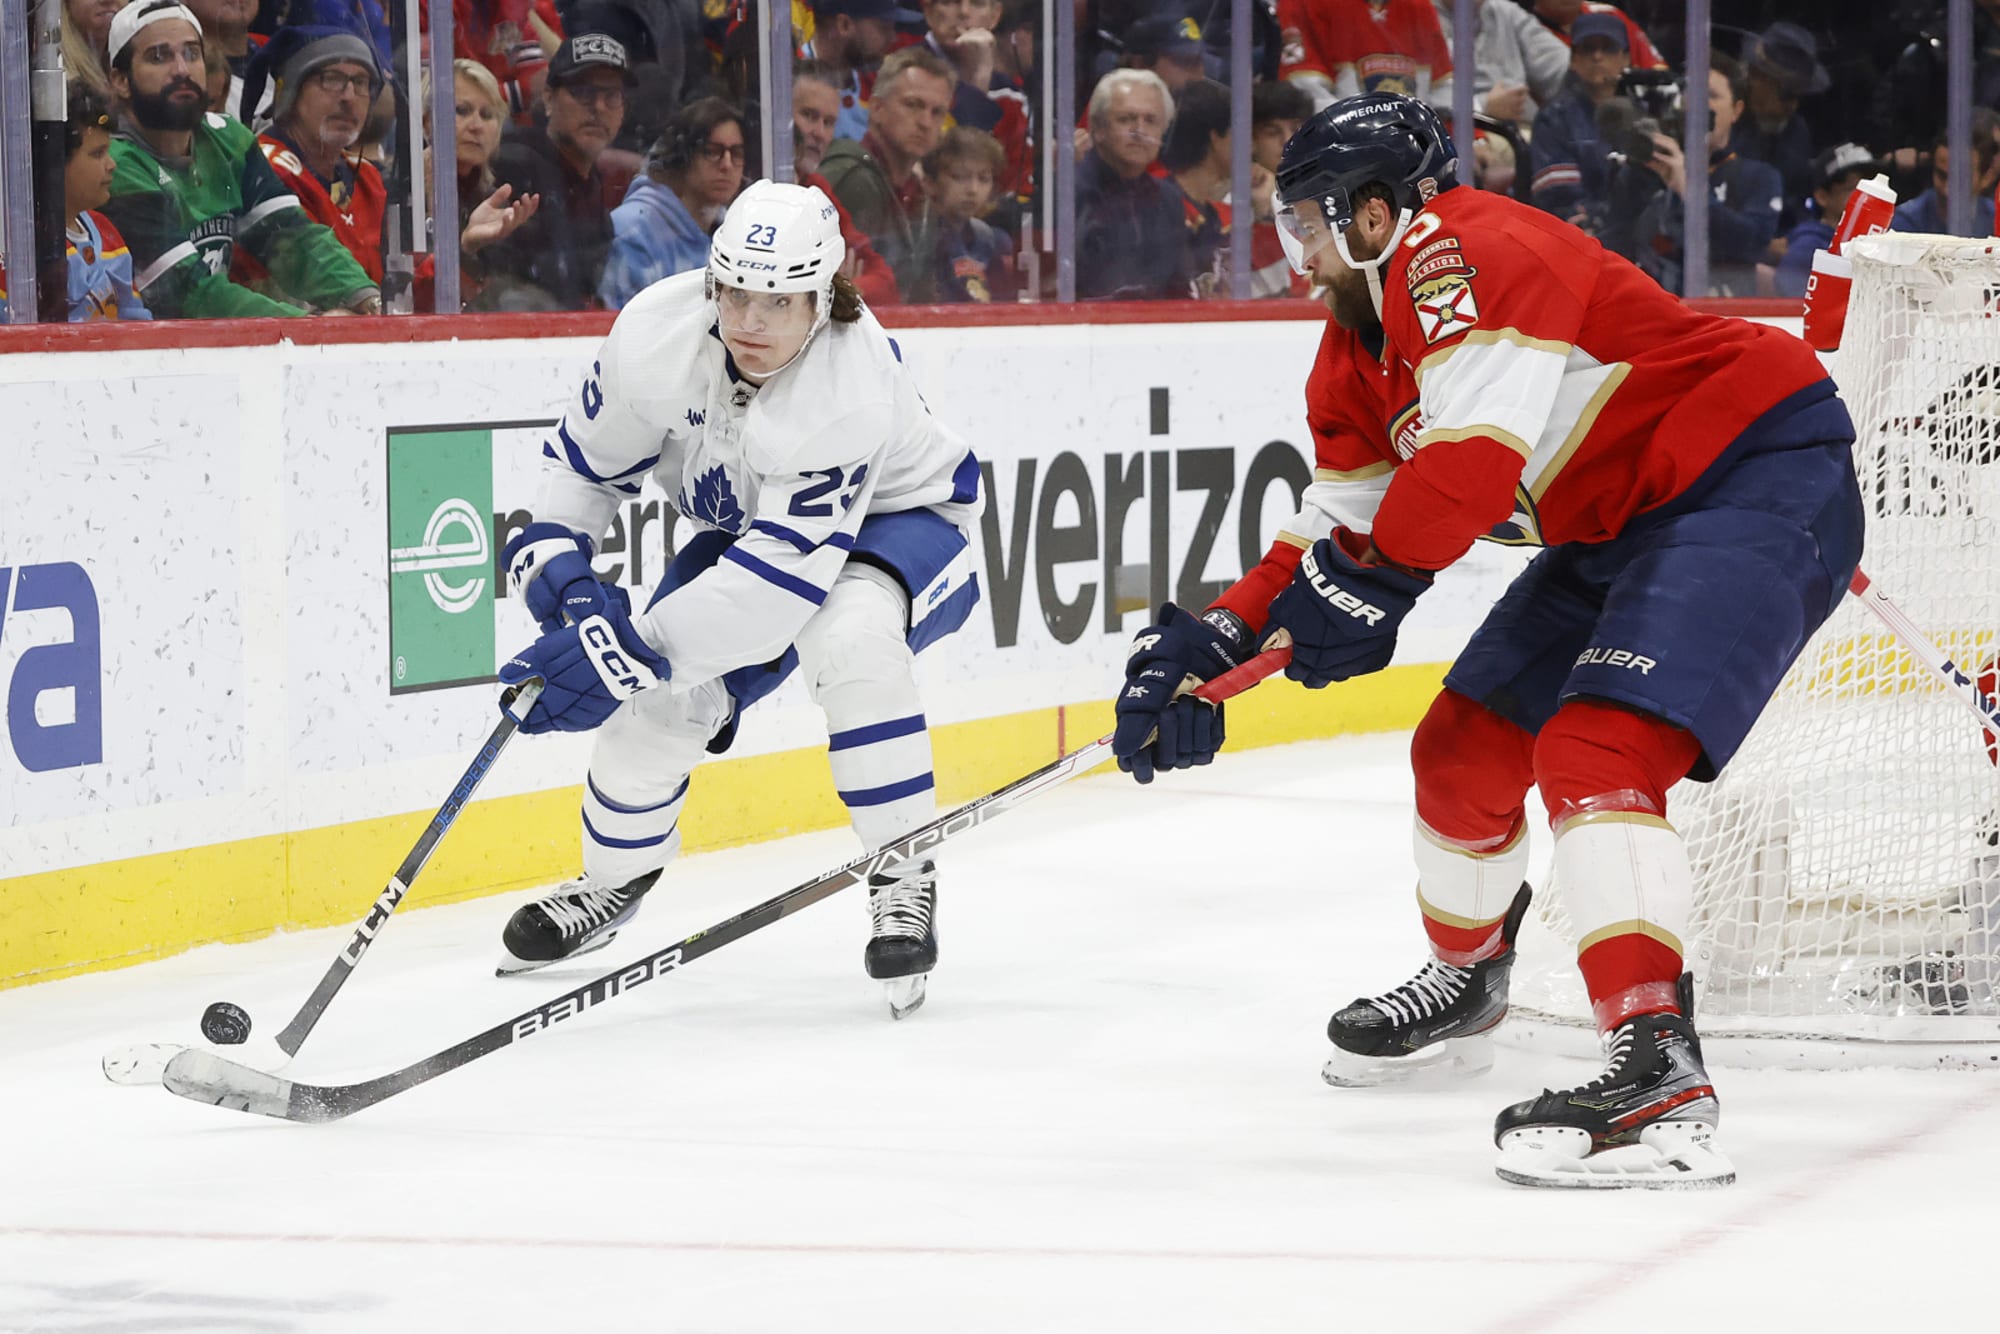 Get that joy back': Matthew Knies makes meaningful Maple Leafs debut